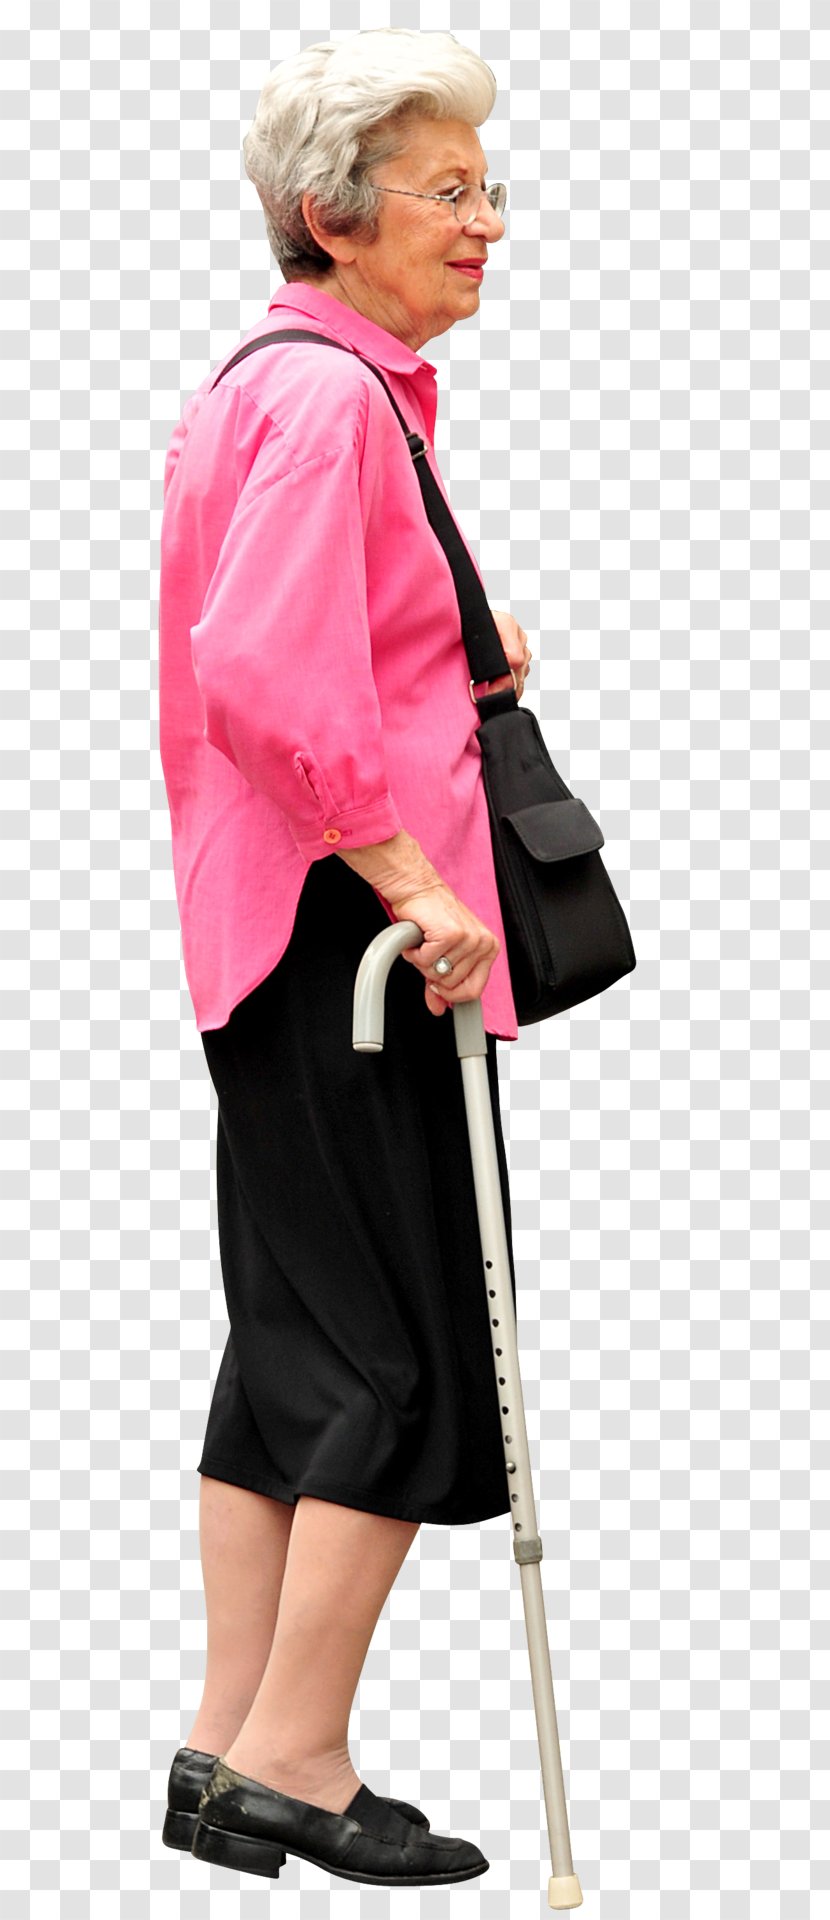 Architectural Rendering Walking Architecture - Pink - Old People Transparent PNG